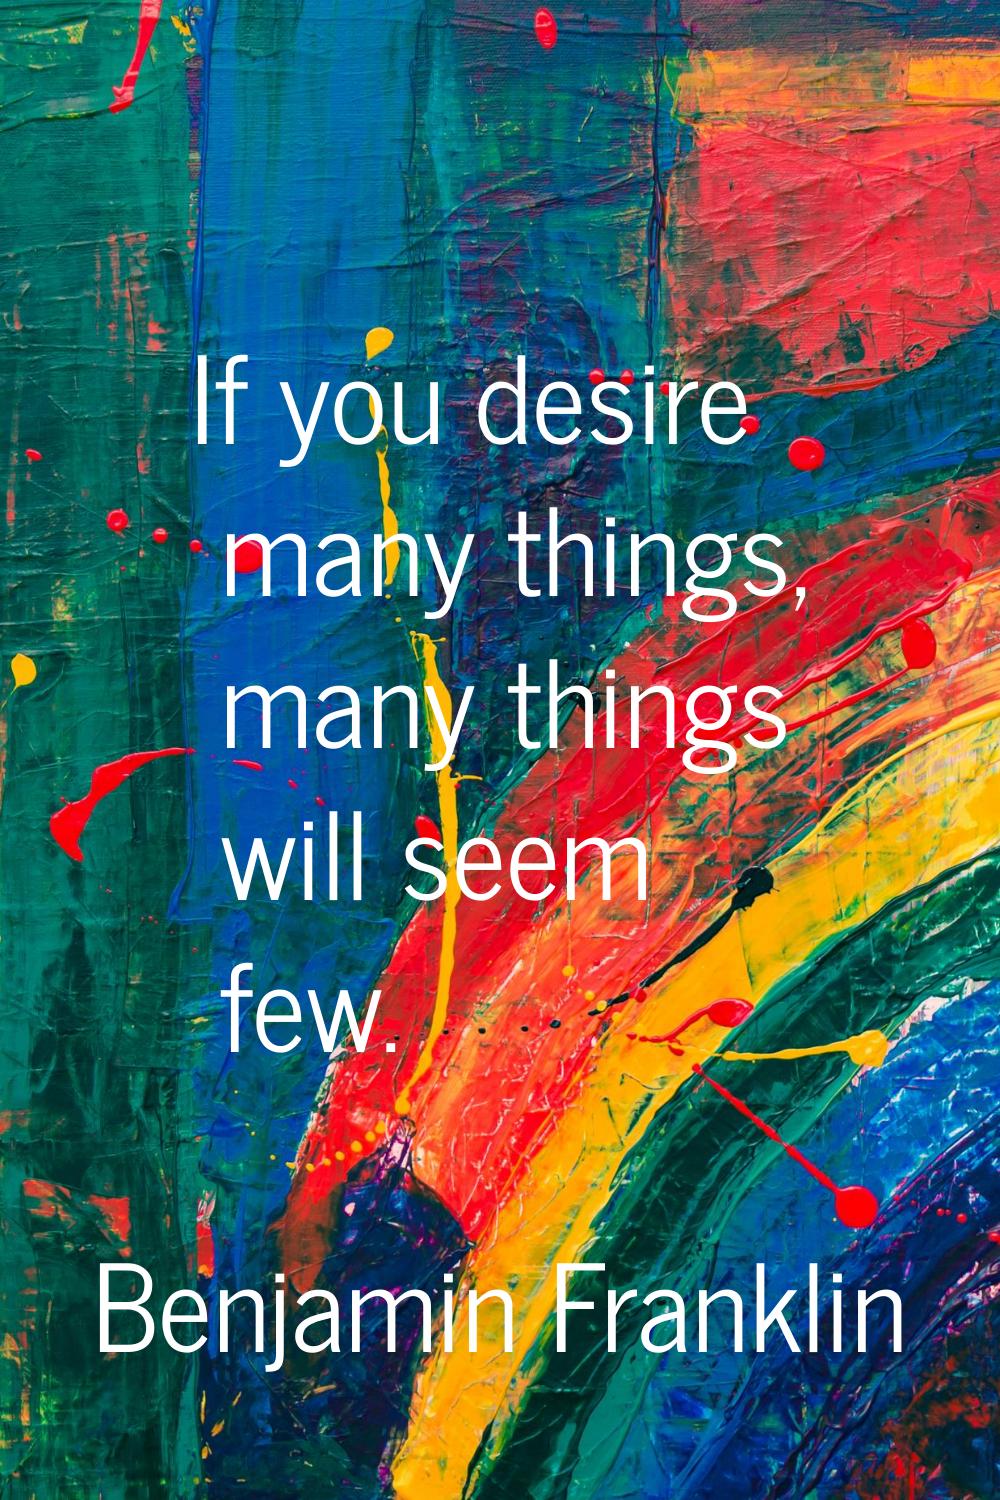 If you desire many things, many things will seem few.